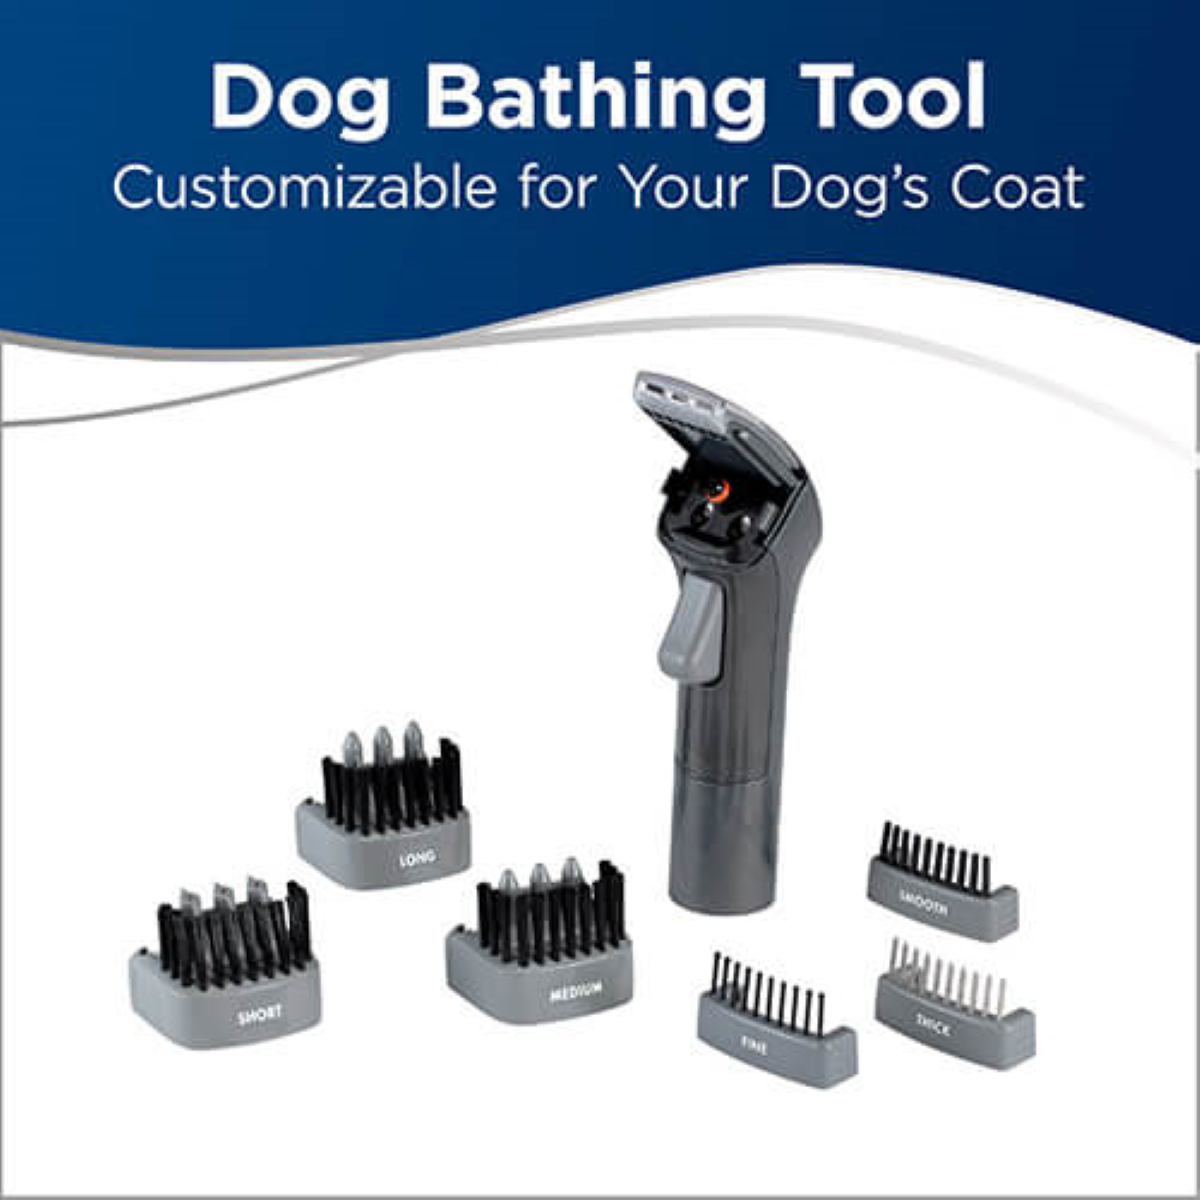 Bissell Barkbath Portable Dog Bath - 2 sets of 3 Customizable Tools - Spray Nozzles and Grooming Clips